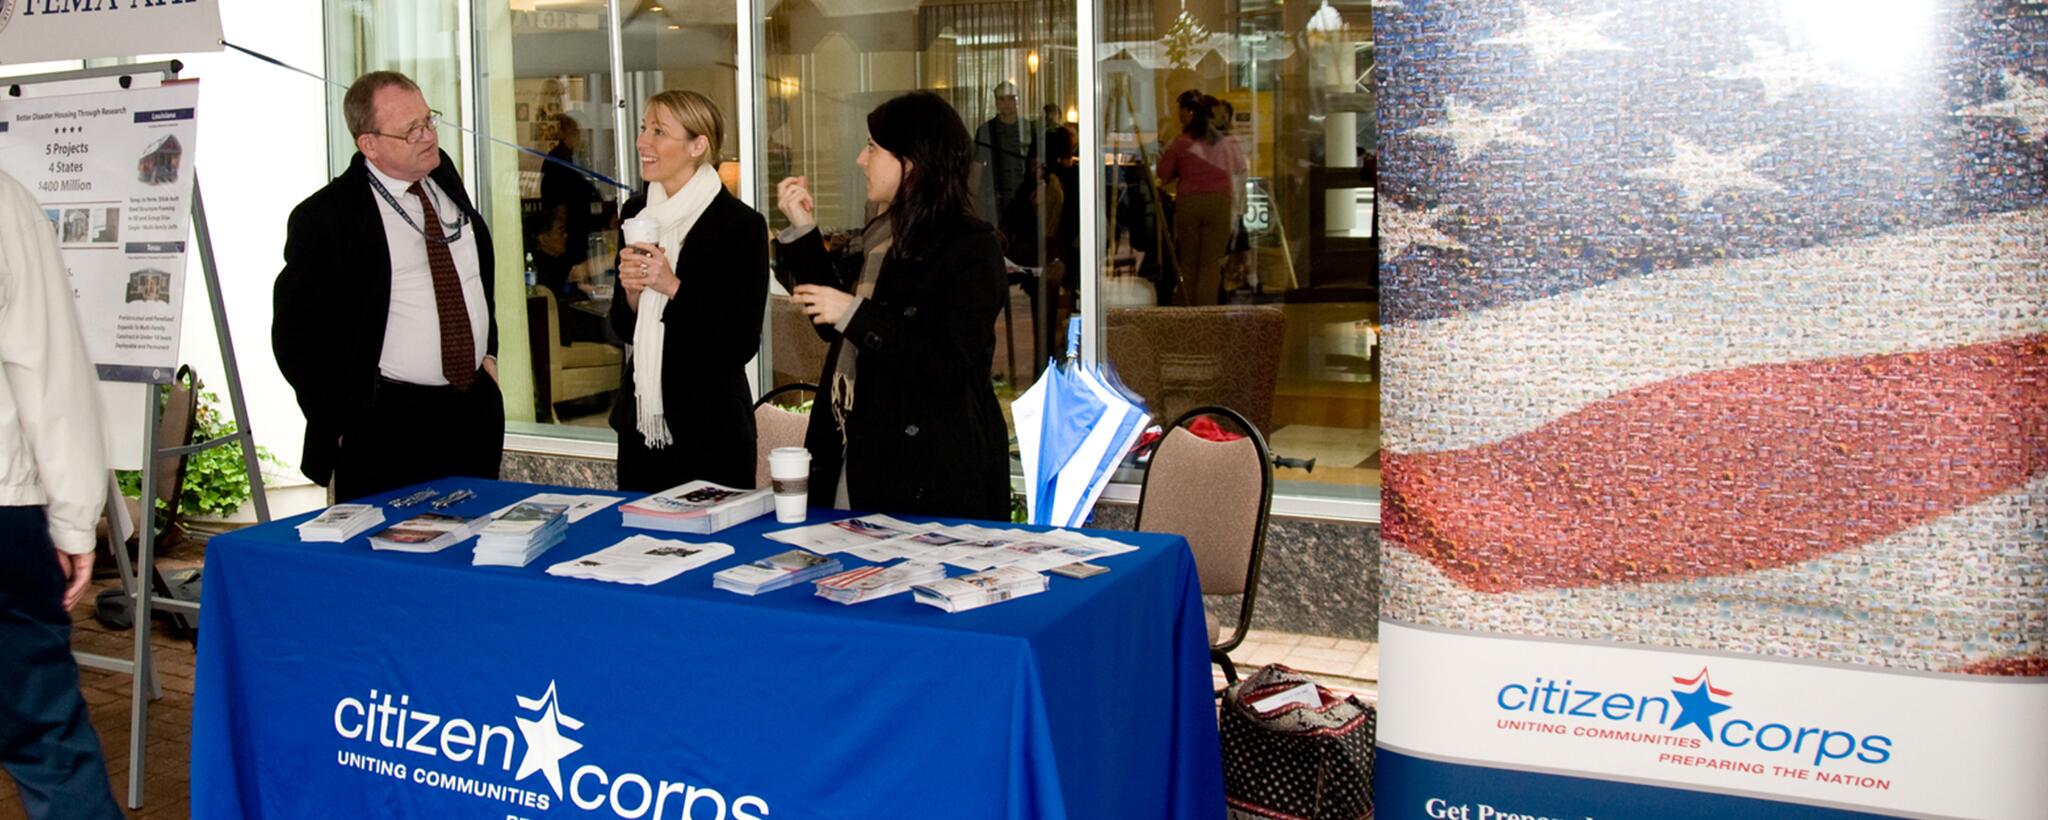 citizen corps members manning a table at a convention